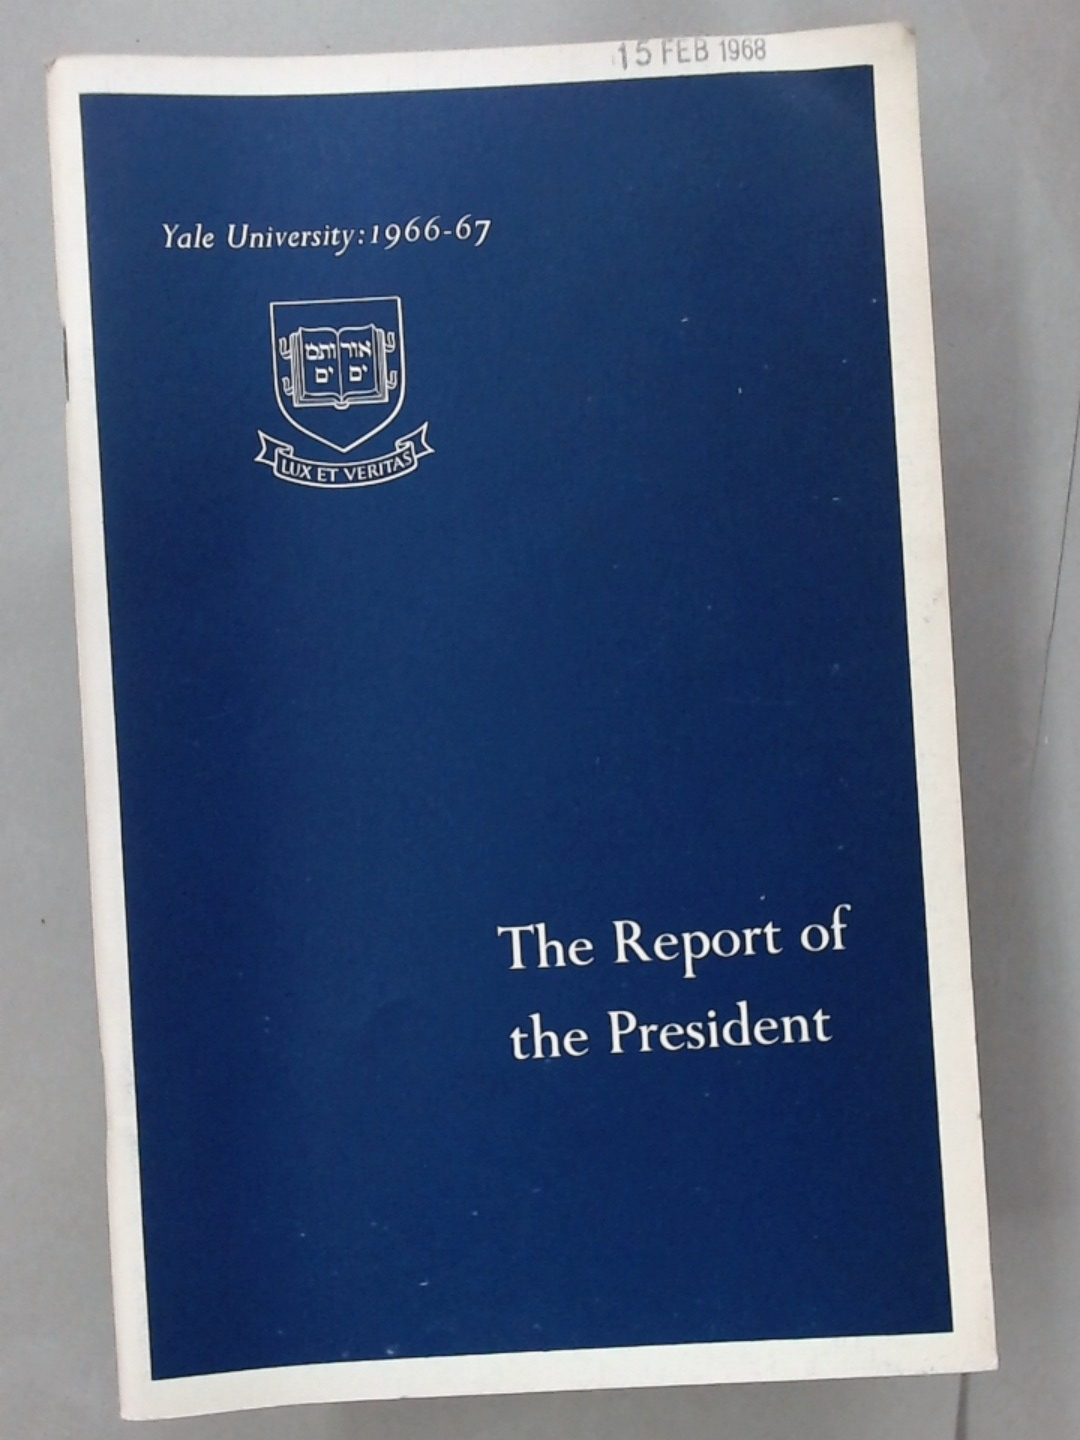 Report of the President, 1966 - 1967.